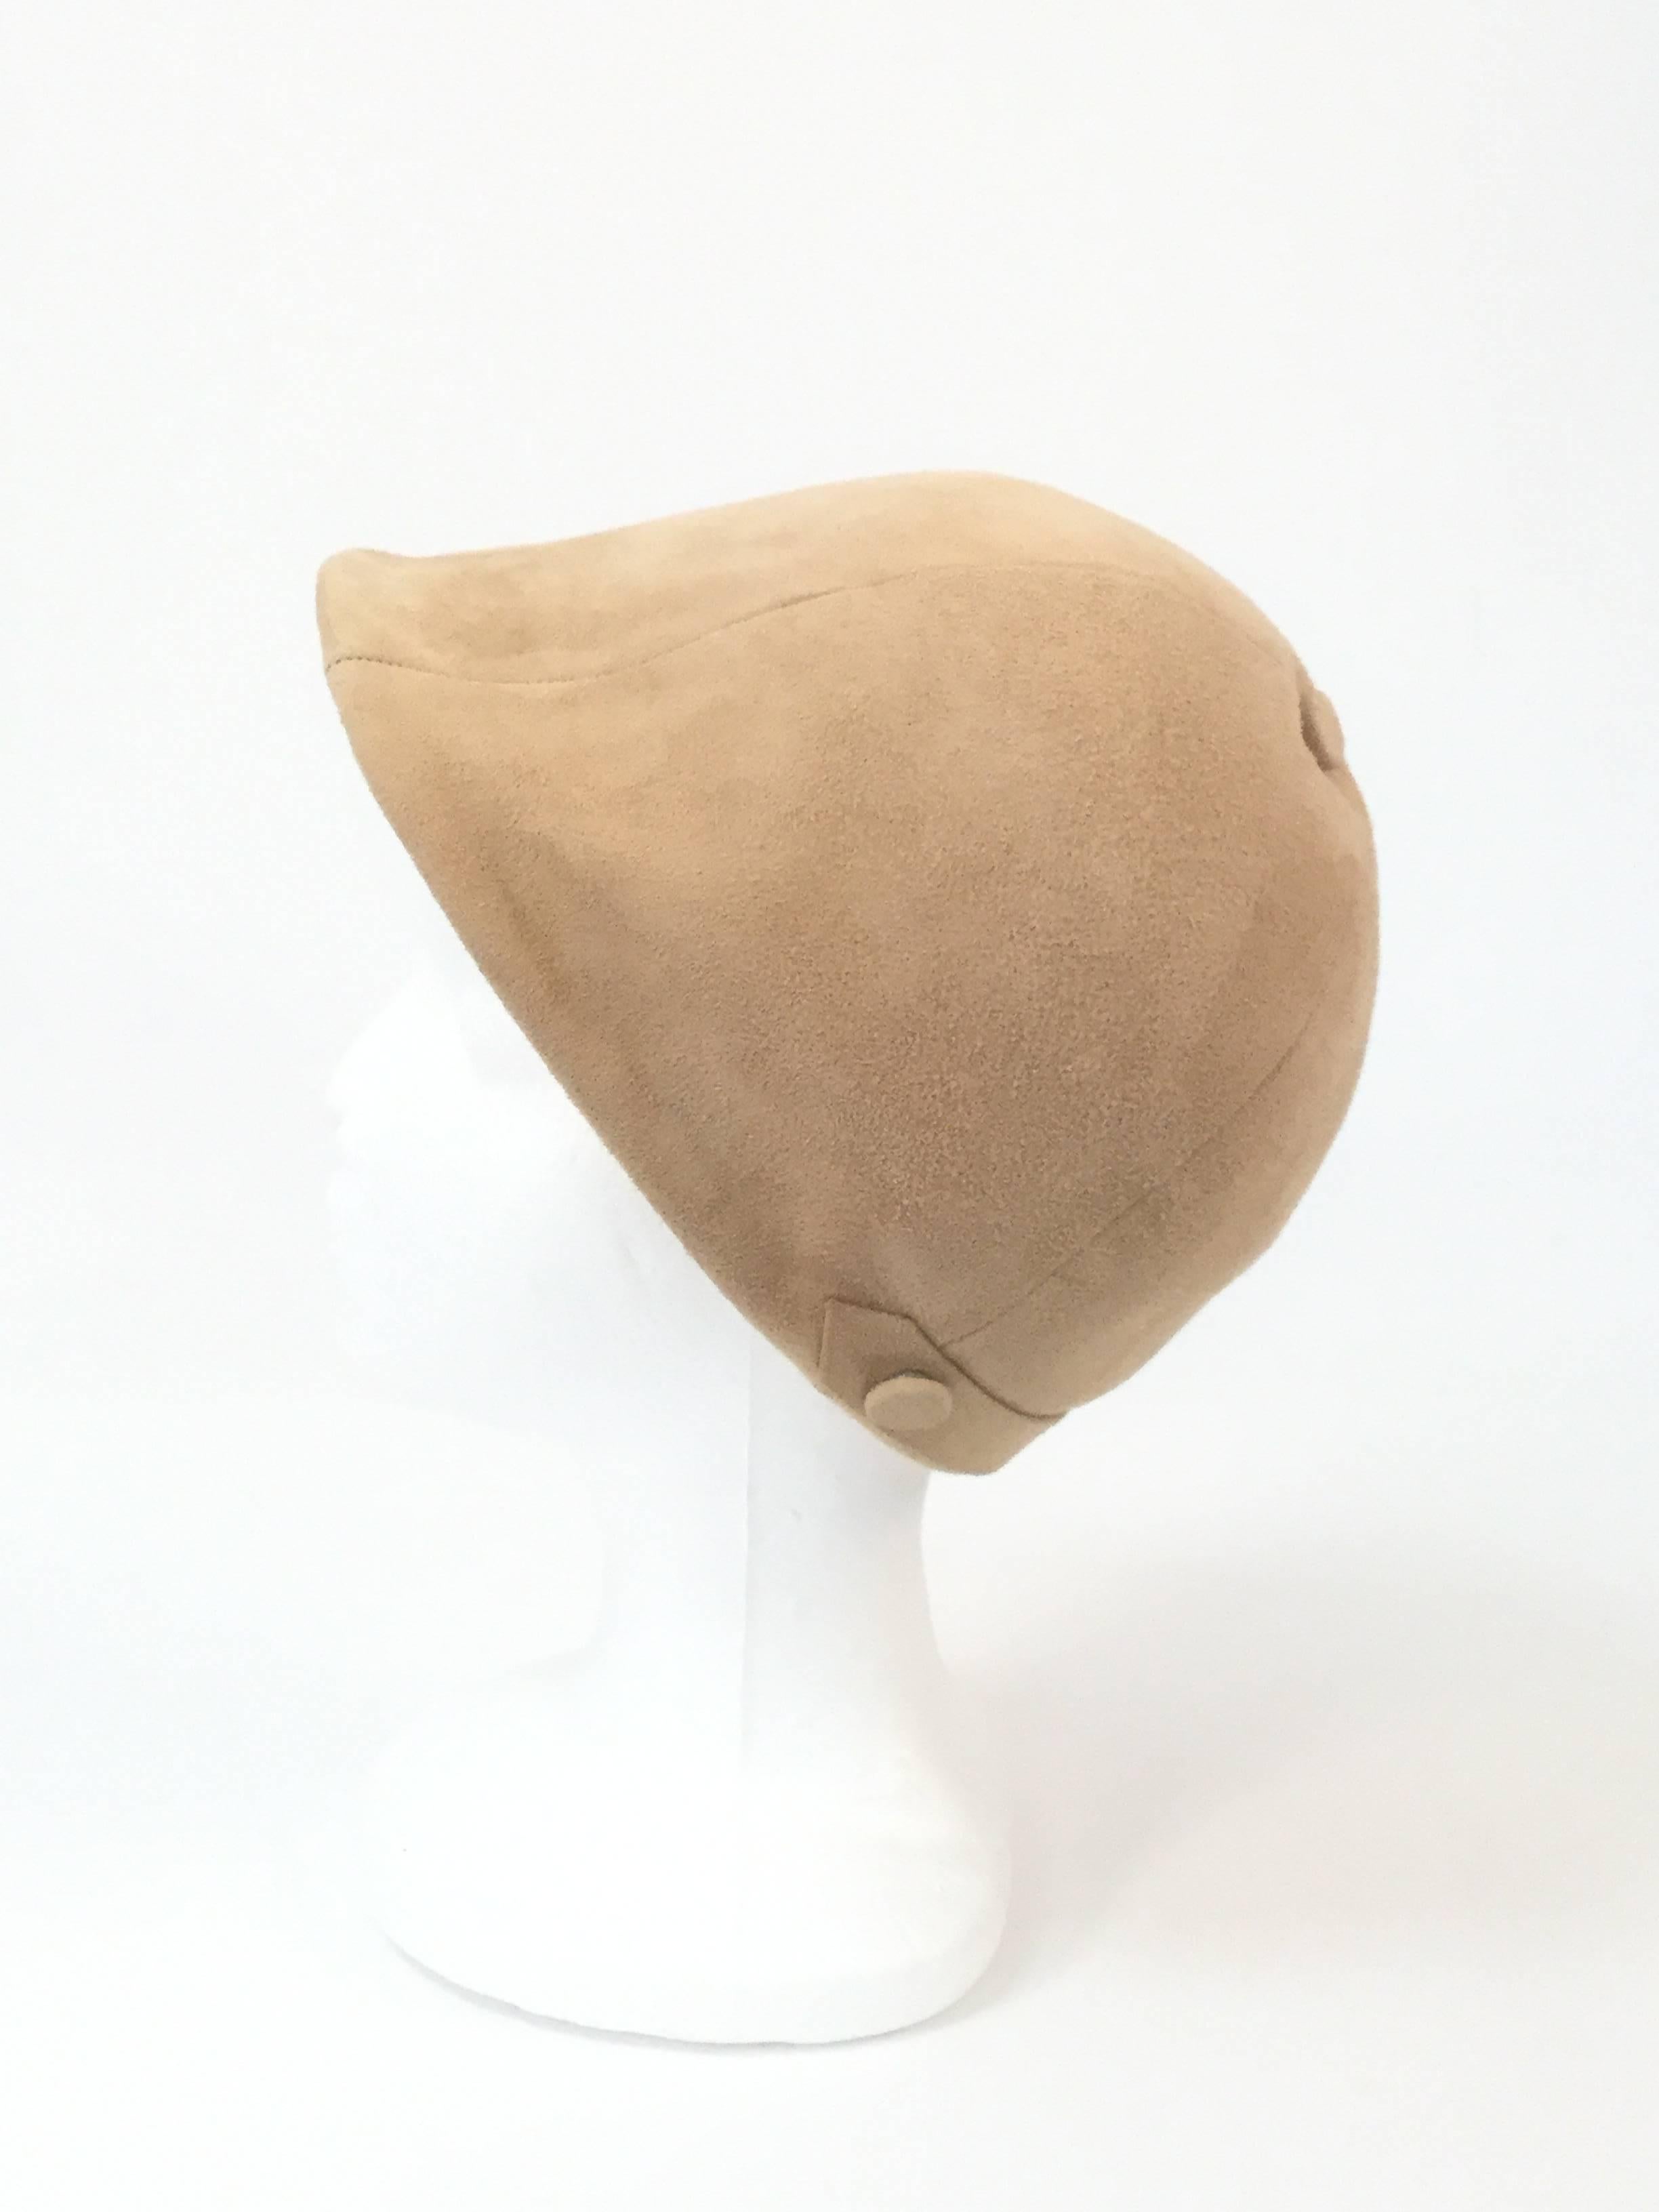 Beige Camel Colored Suede Equestrian Hat, 1960s  For Sale